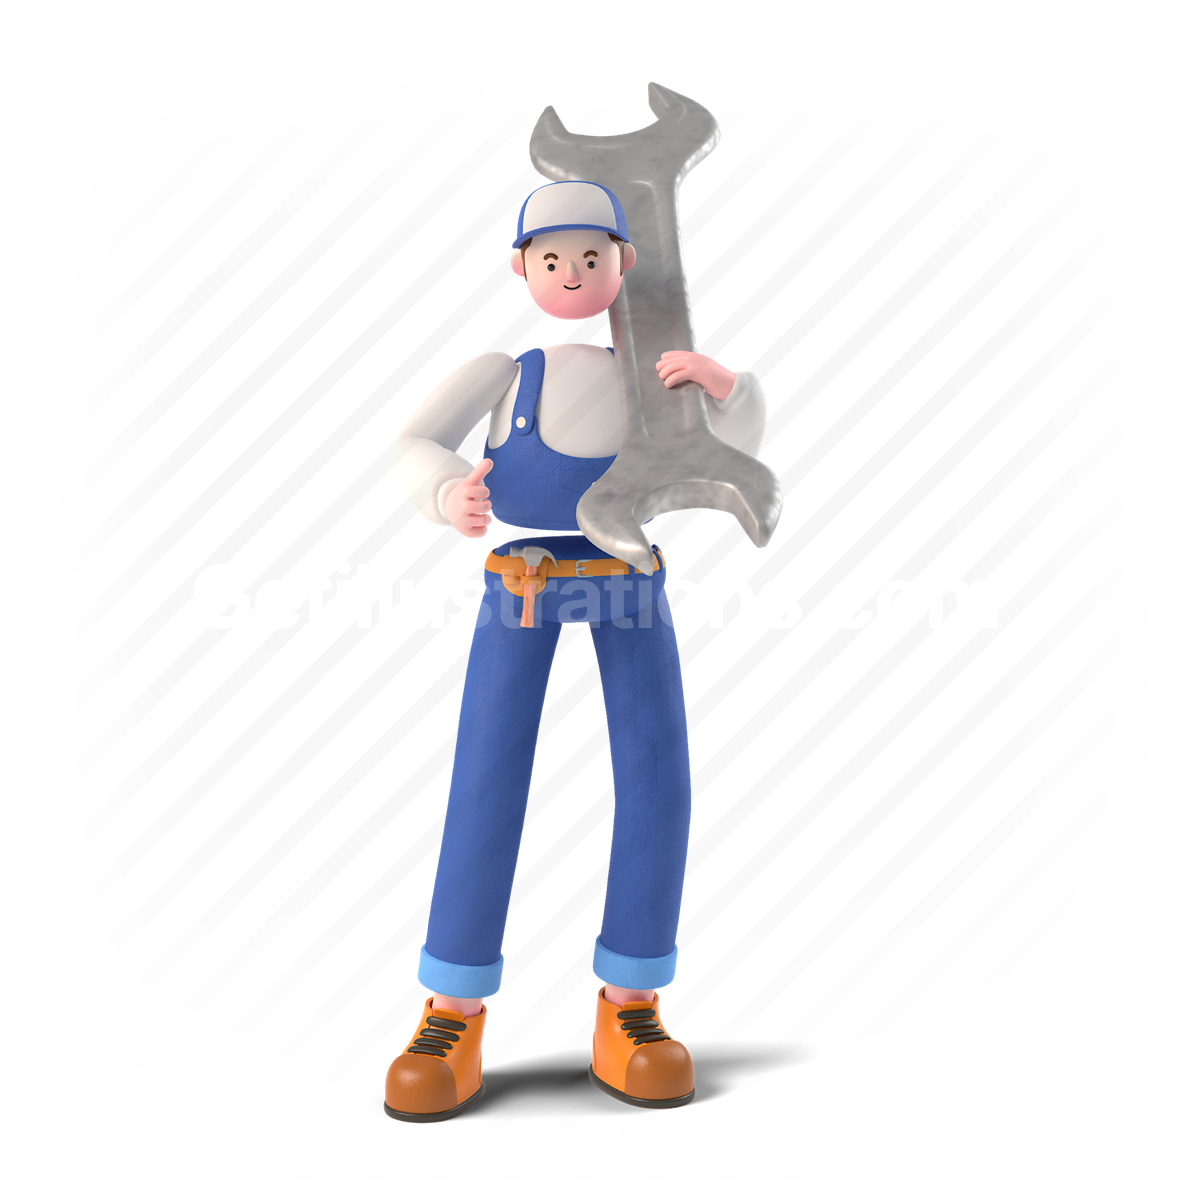 3d, people, person, maintenance, repair, fix, wrench, man